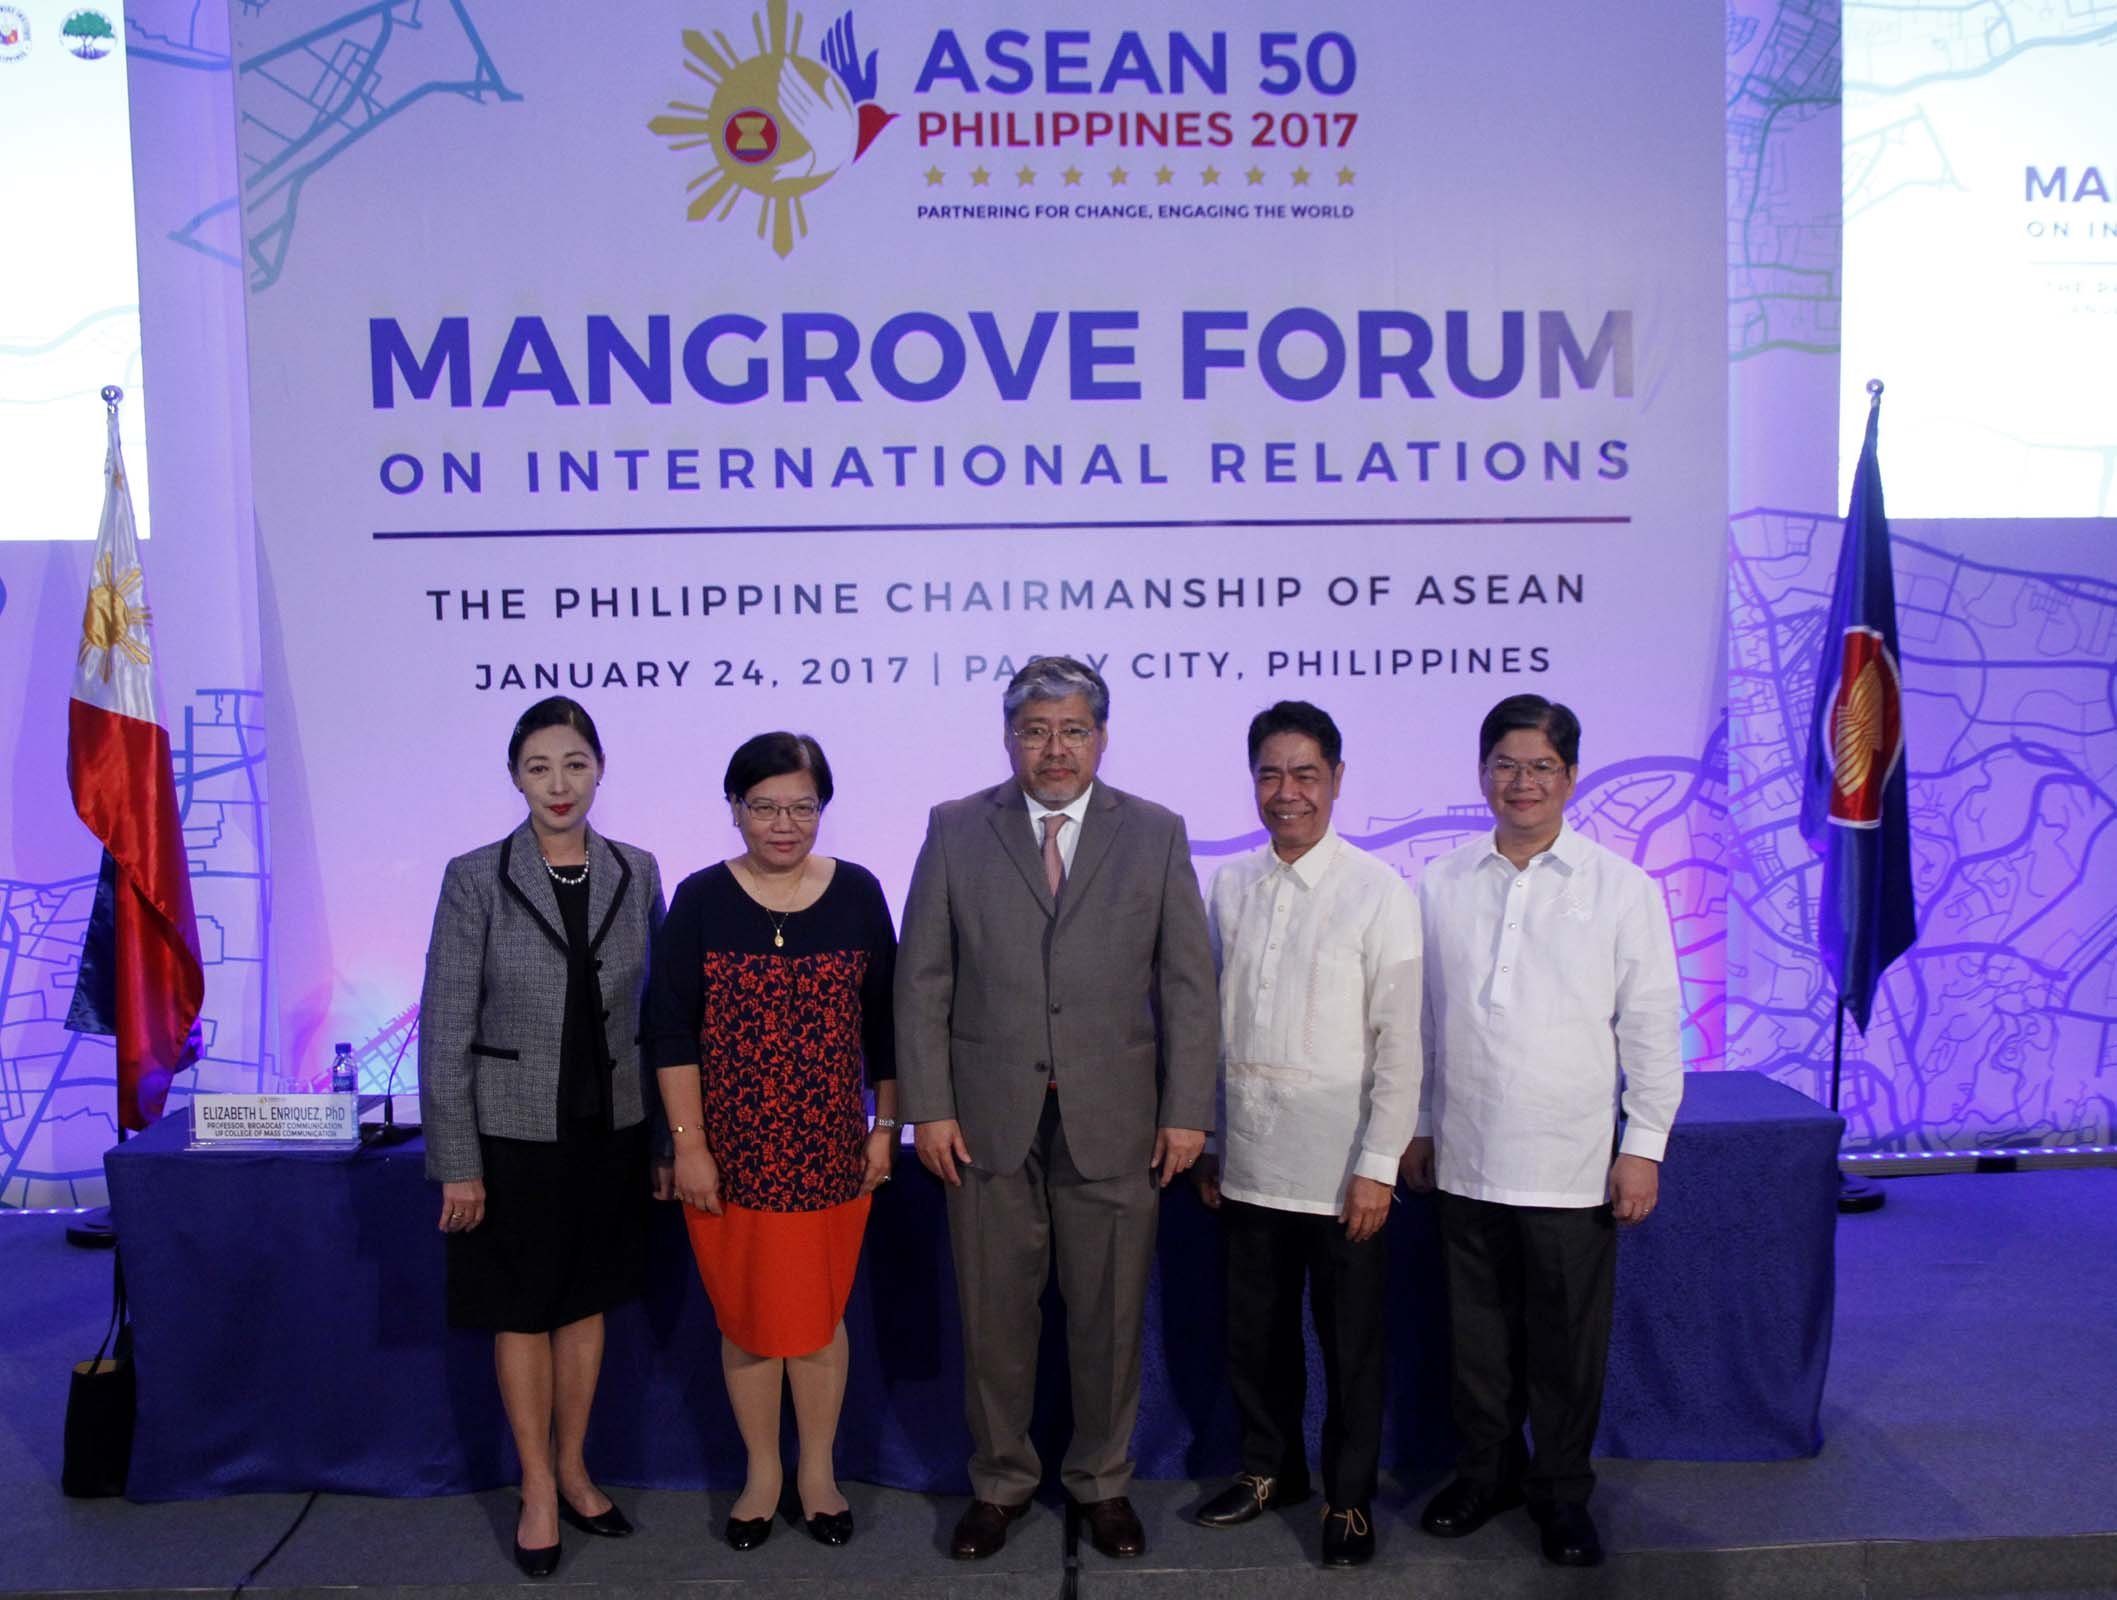 Forum tackles East Timor's desire to join ASEAN